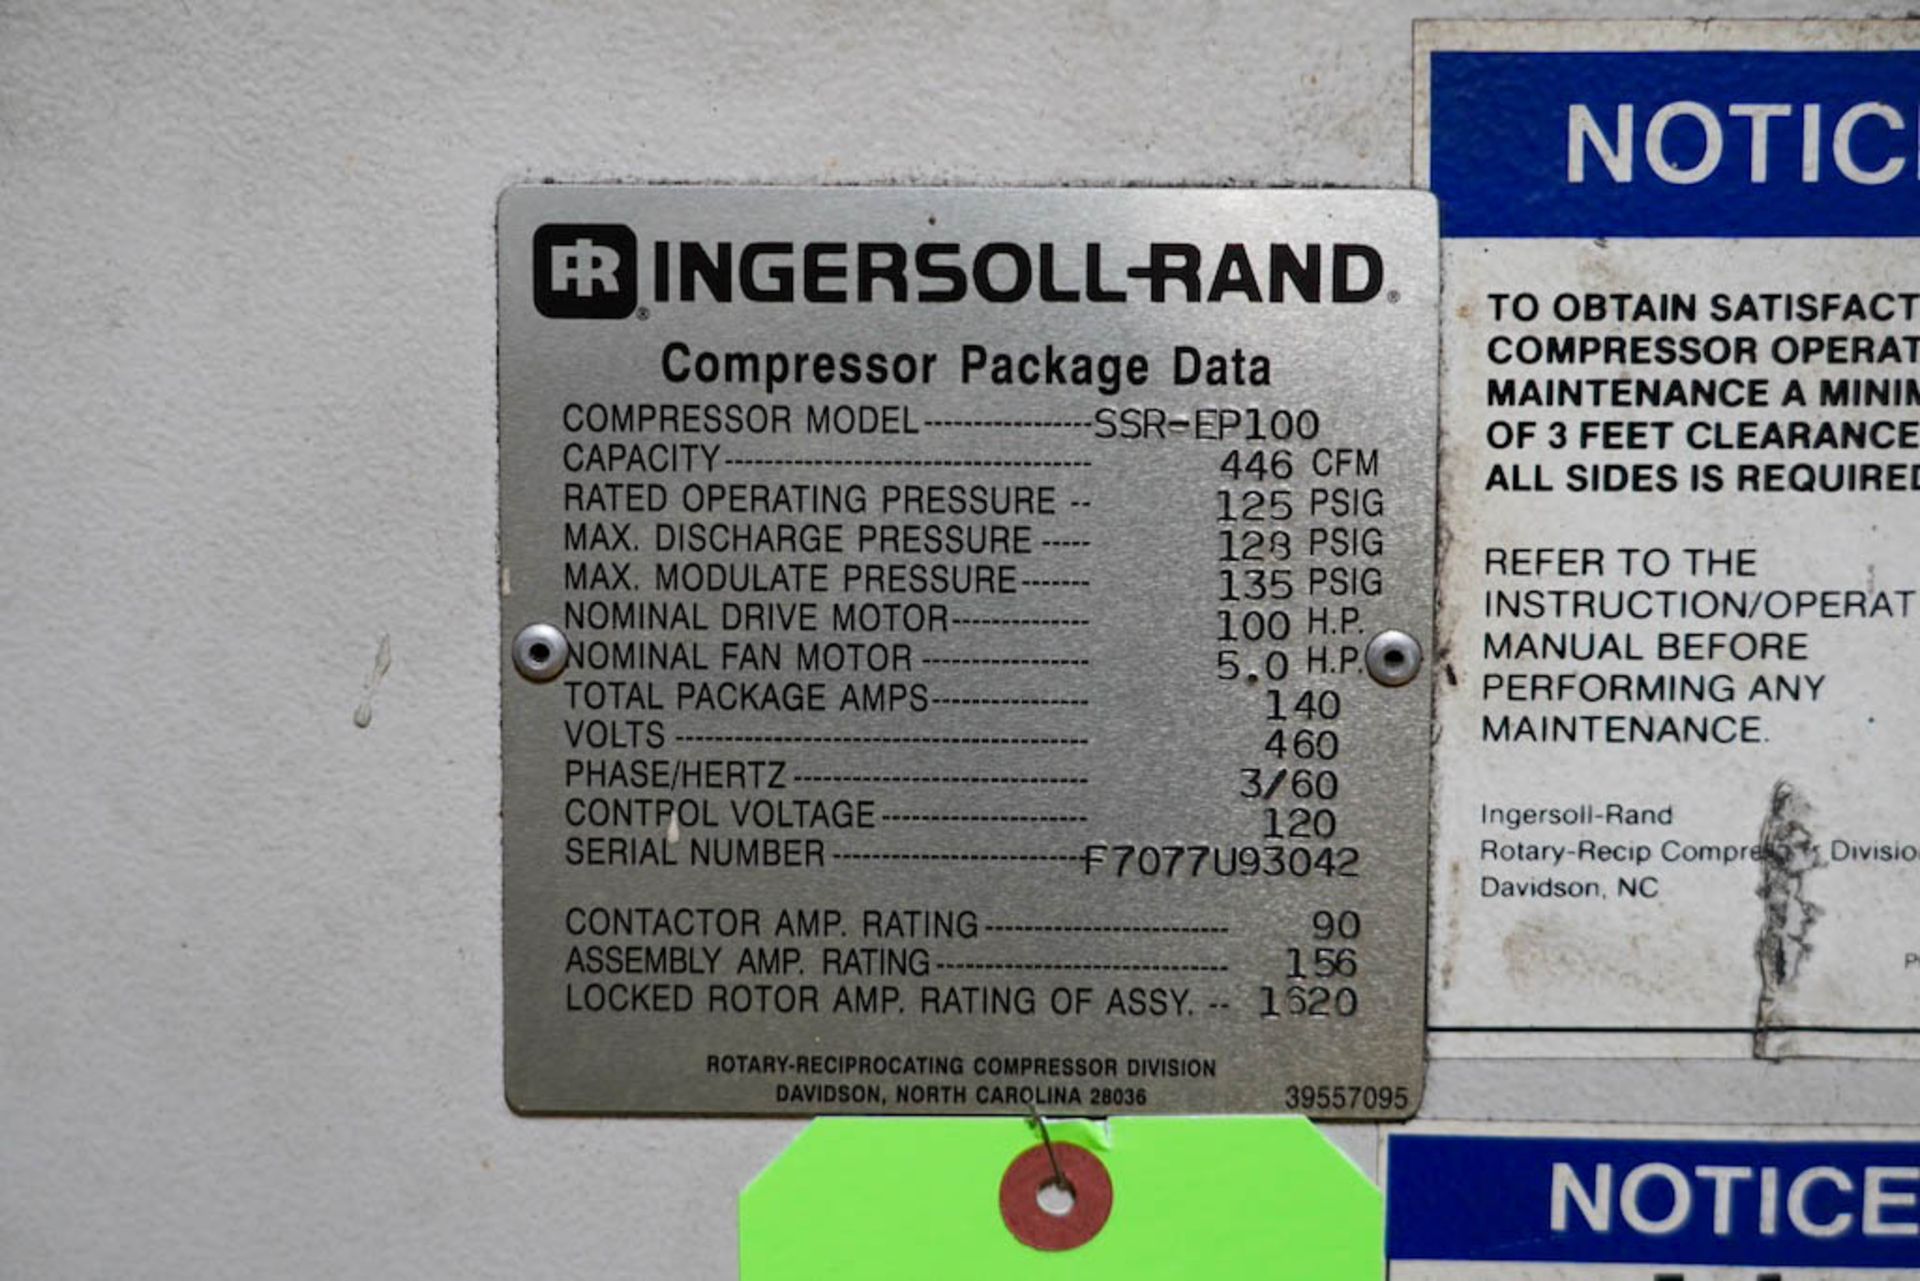 Ingersoll Rand SSR-EP100 Rotary Screw Air Compressor - Image 4 of 4